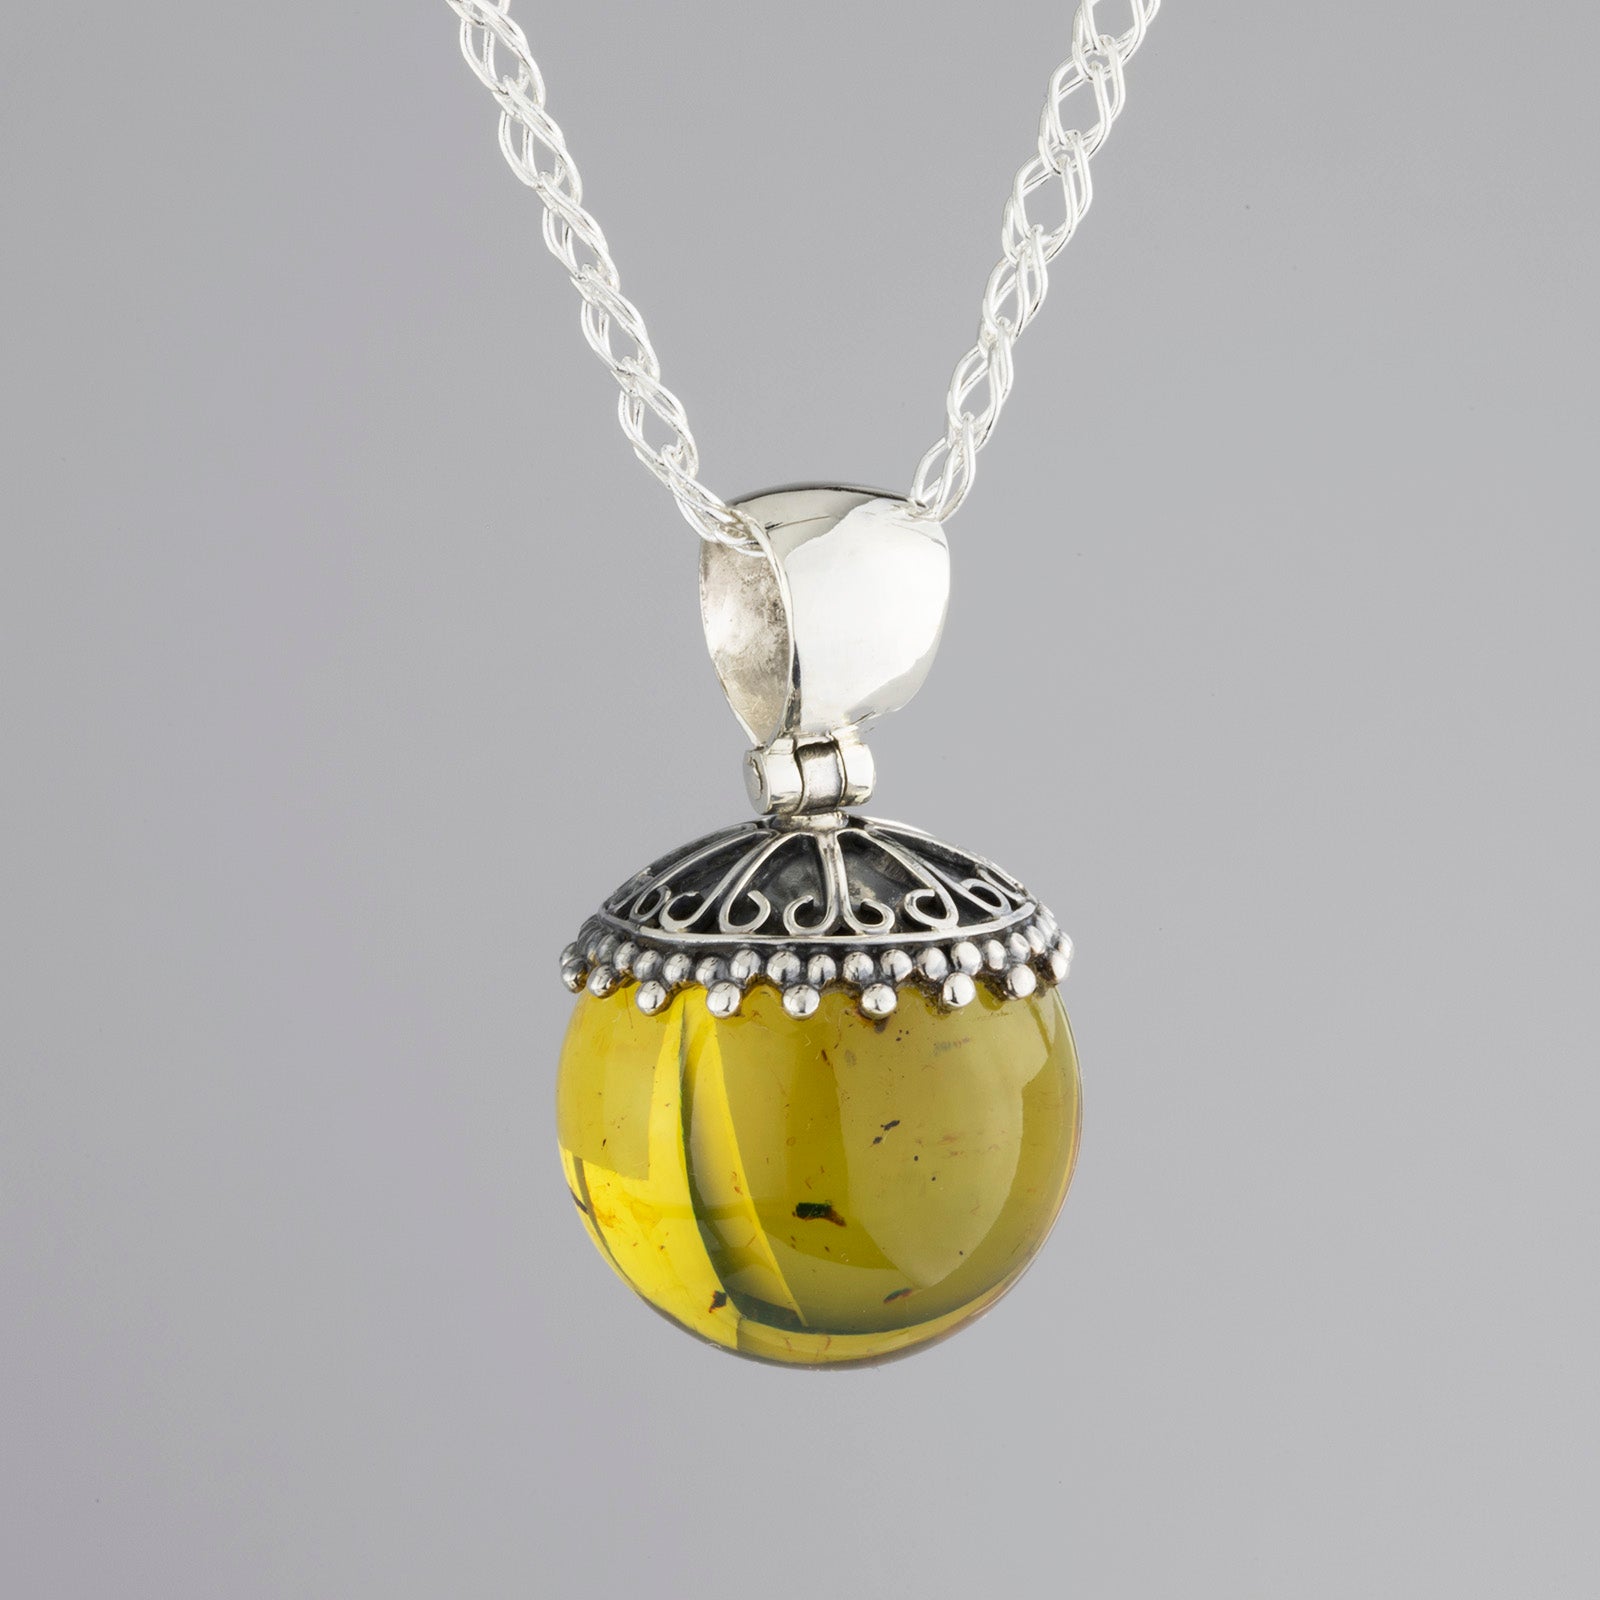 Mexican silver and amber ball necklace